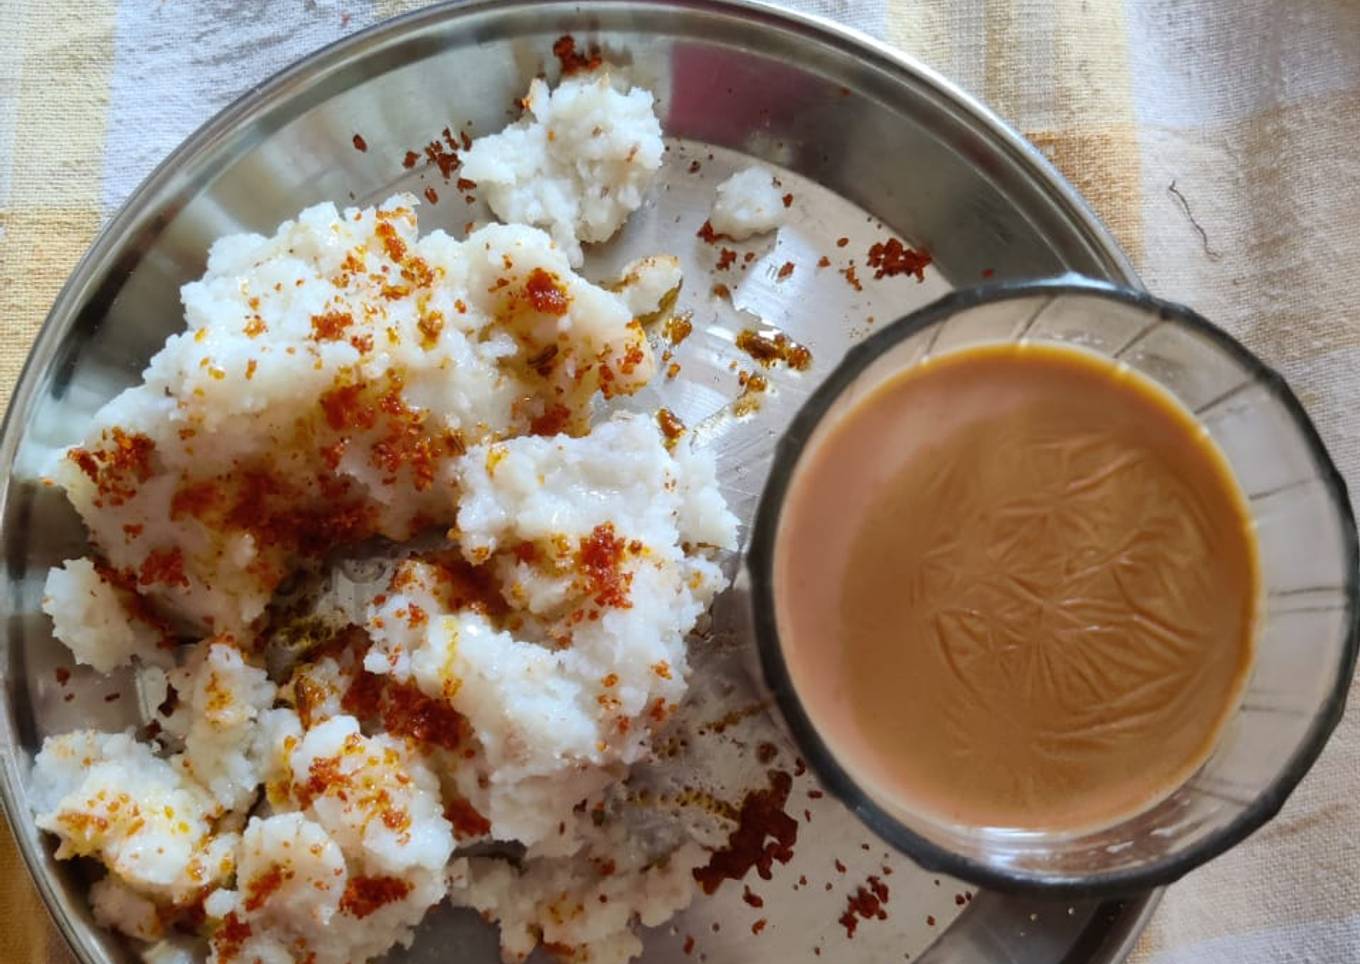 Tea with instant khichu